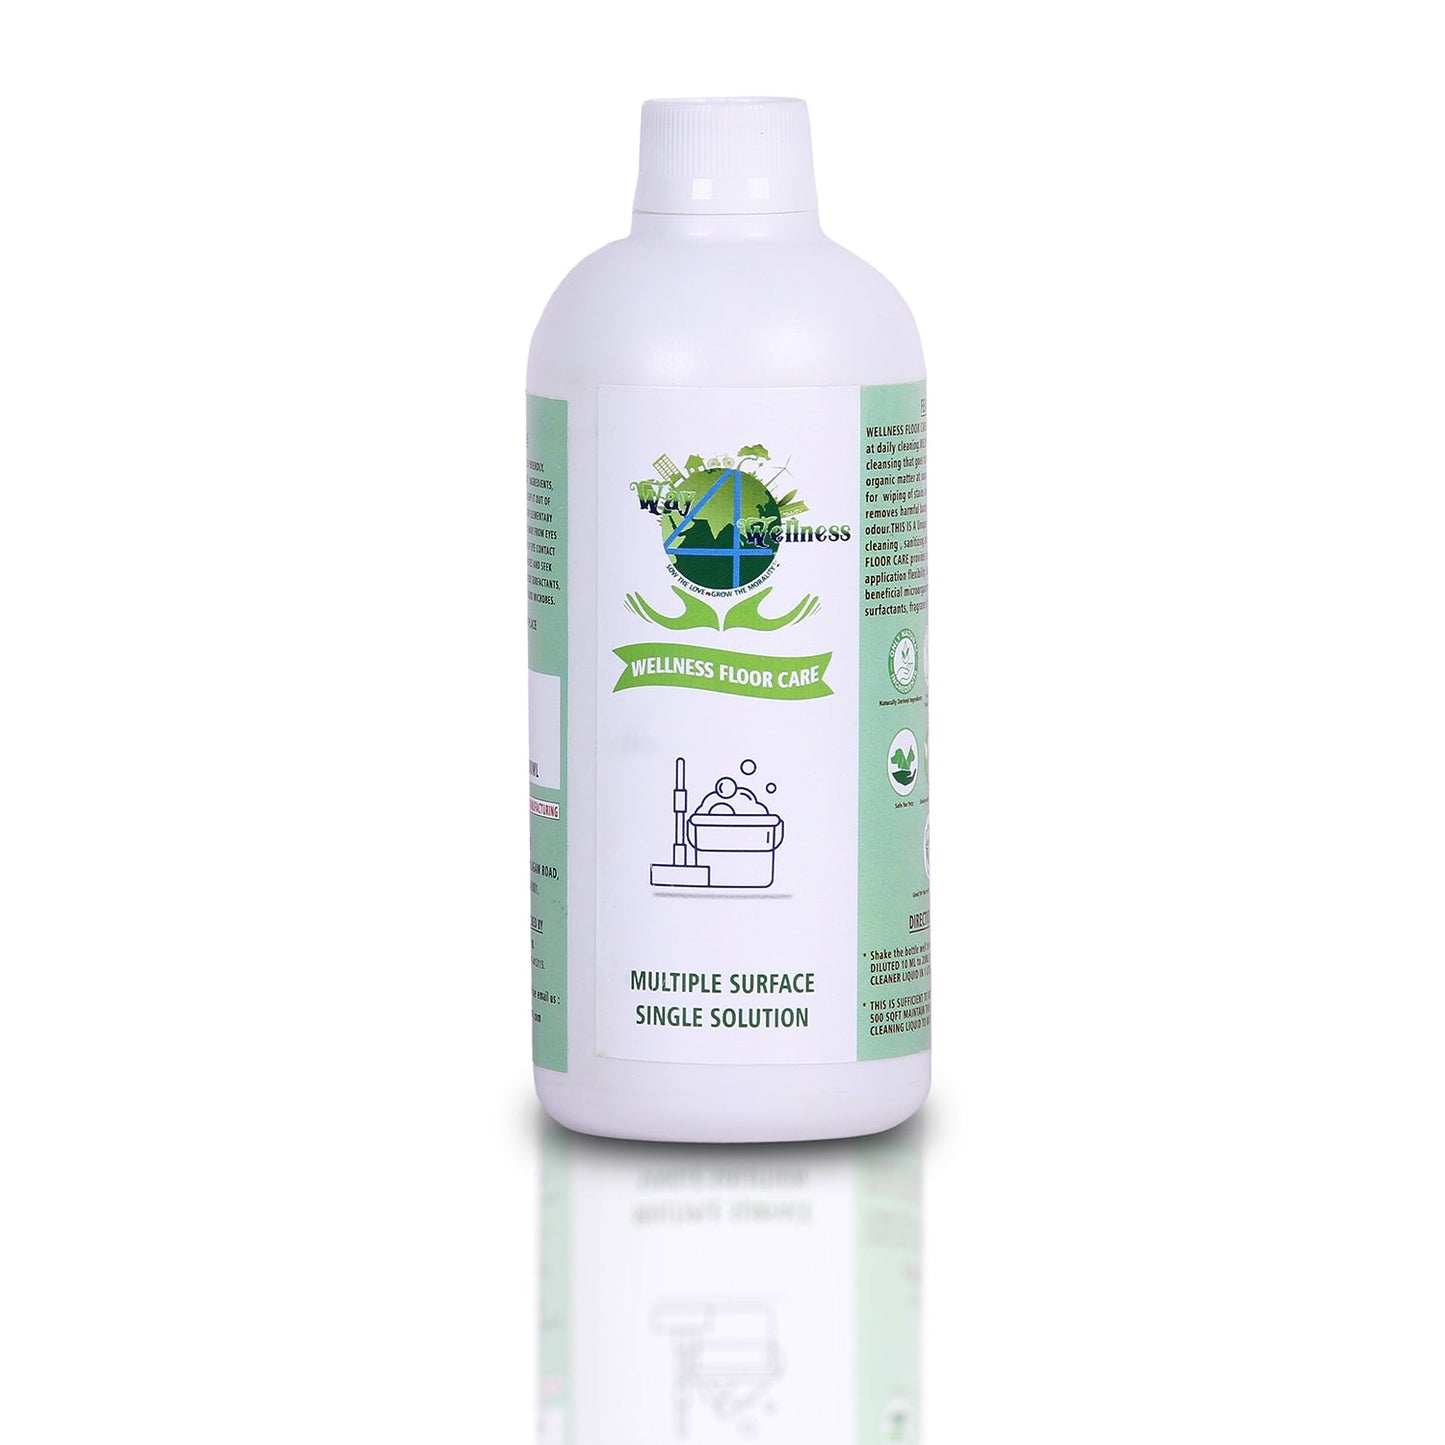 Wellness Natural Floor Care -  Natural Plant Based Multiple Surface/Floor Cleaning Liquid | Eco-Friendly, Non-Toxic Cleaning liquid, Biodegradable   - (Pack of 2 -500ML each )